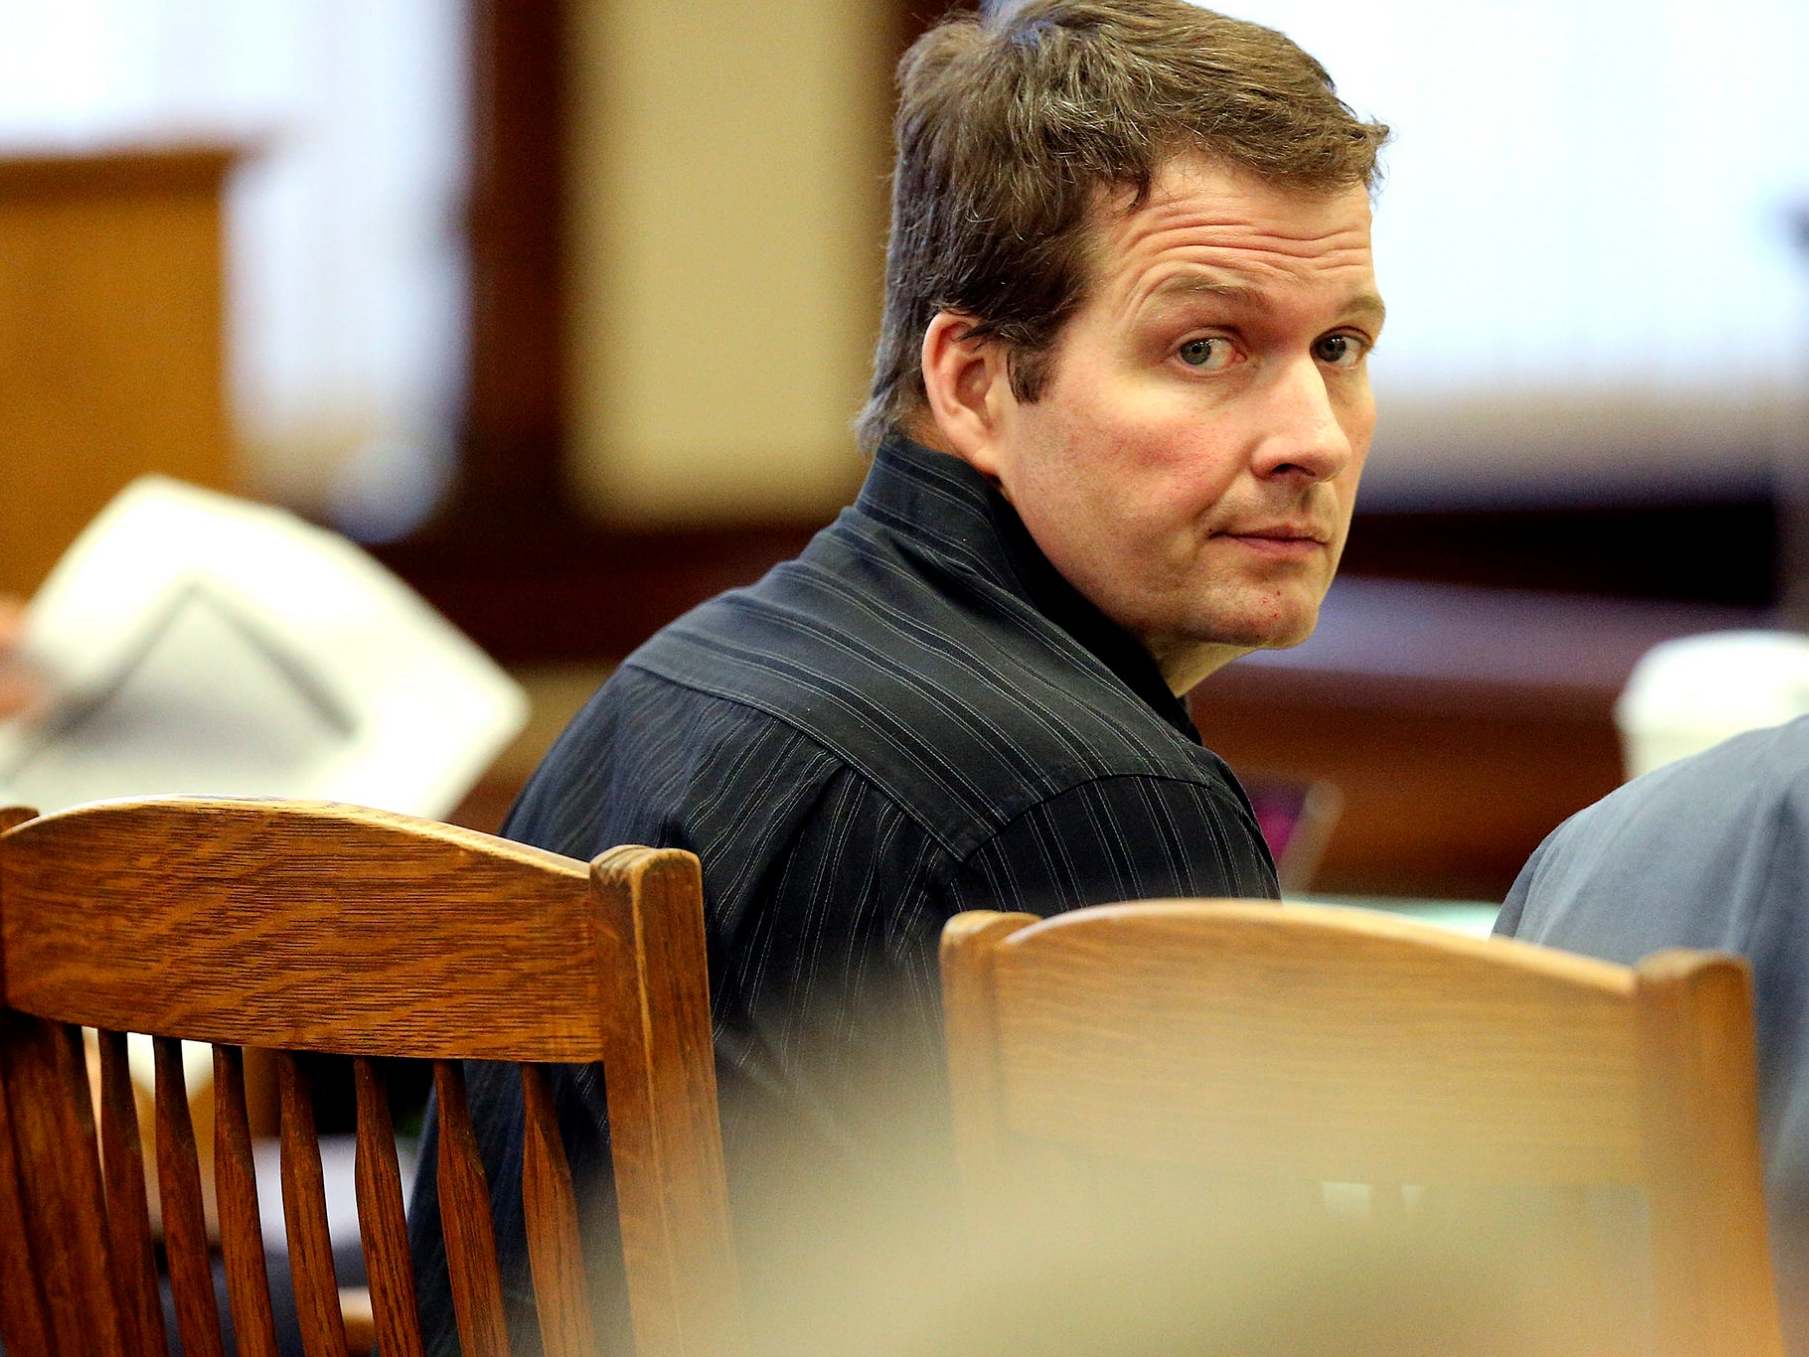 Todd Mullis,43, at the start of his murder trial